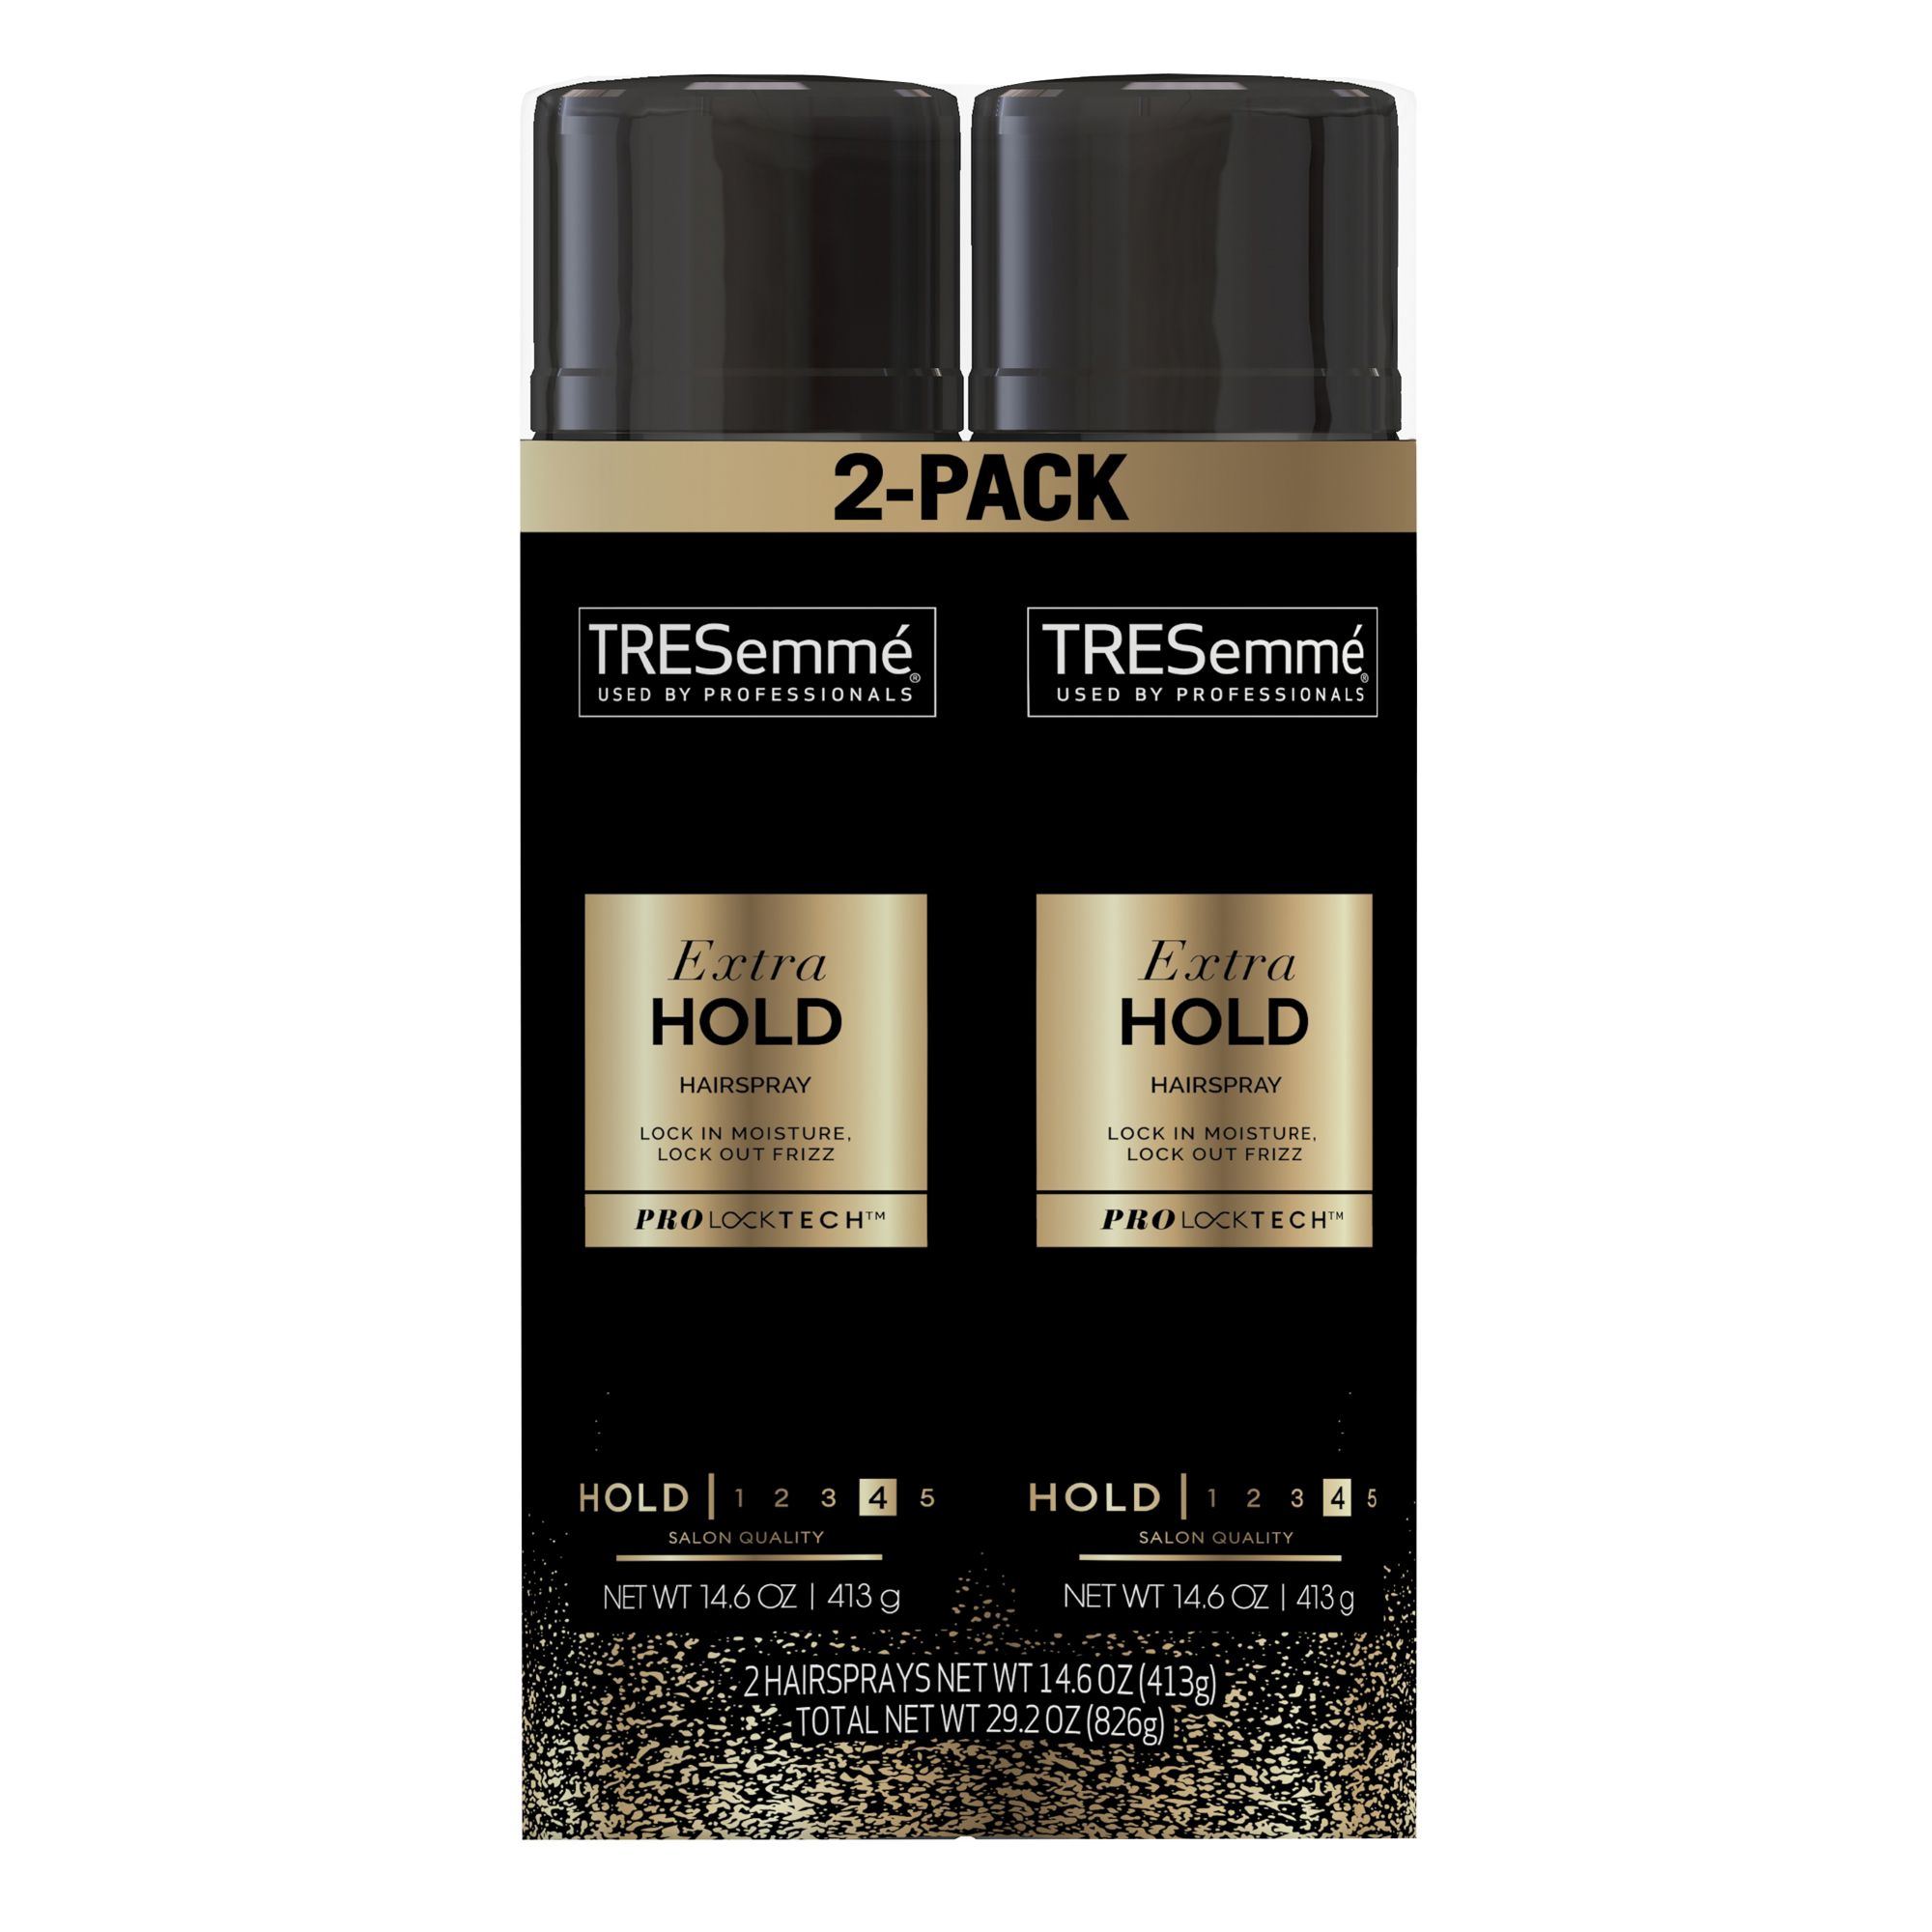 Tresemme Extra Hold Spray (Level 4) – Pittsburgh Barber Supply